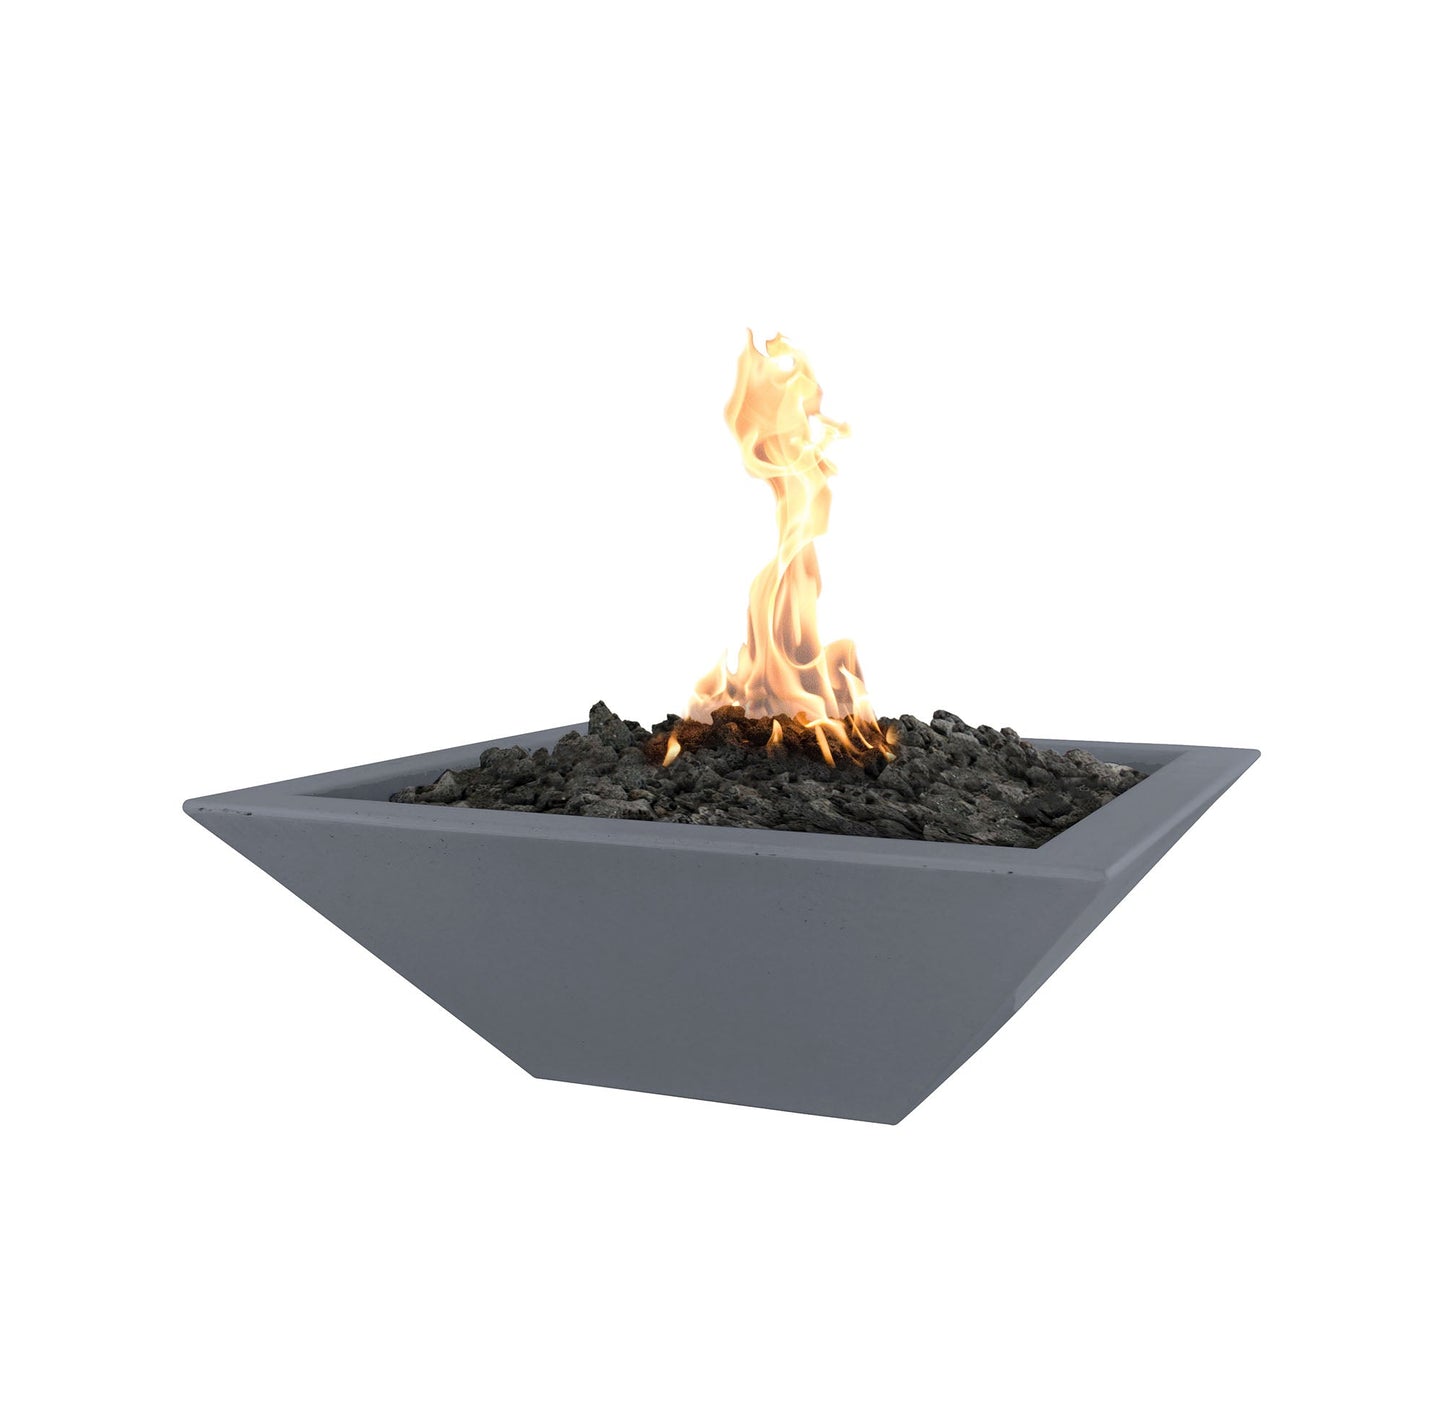 The Outdoor Plus Square Maya 24" Brown GFRC Concrete Liquid Propane Fire Bowl with Match Lit with Flame Sense Ignition